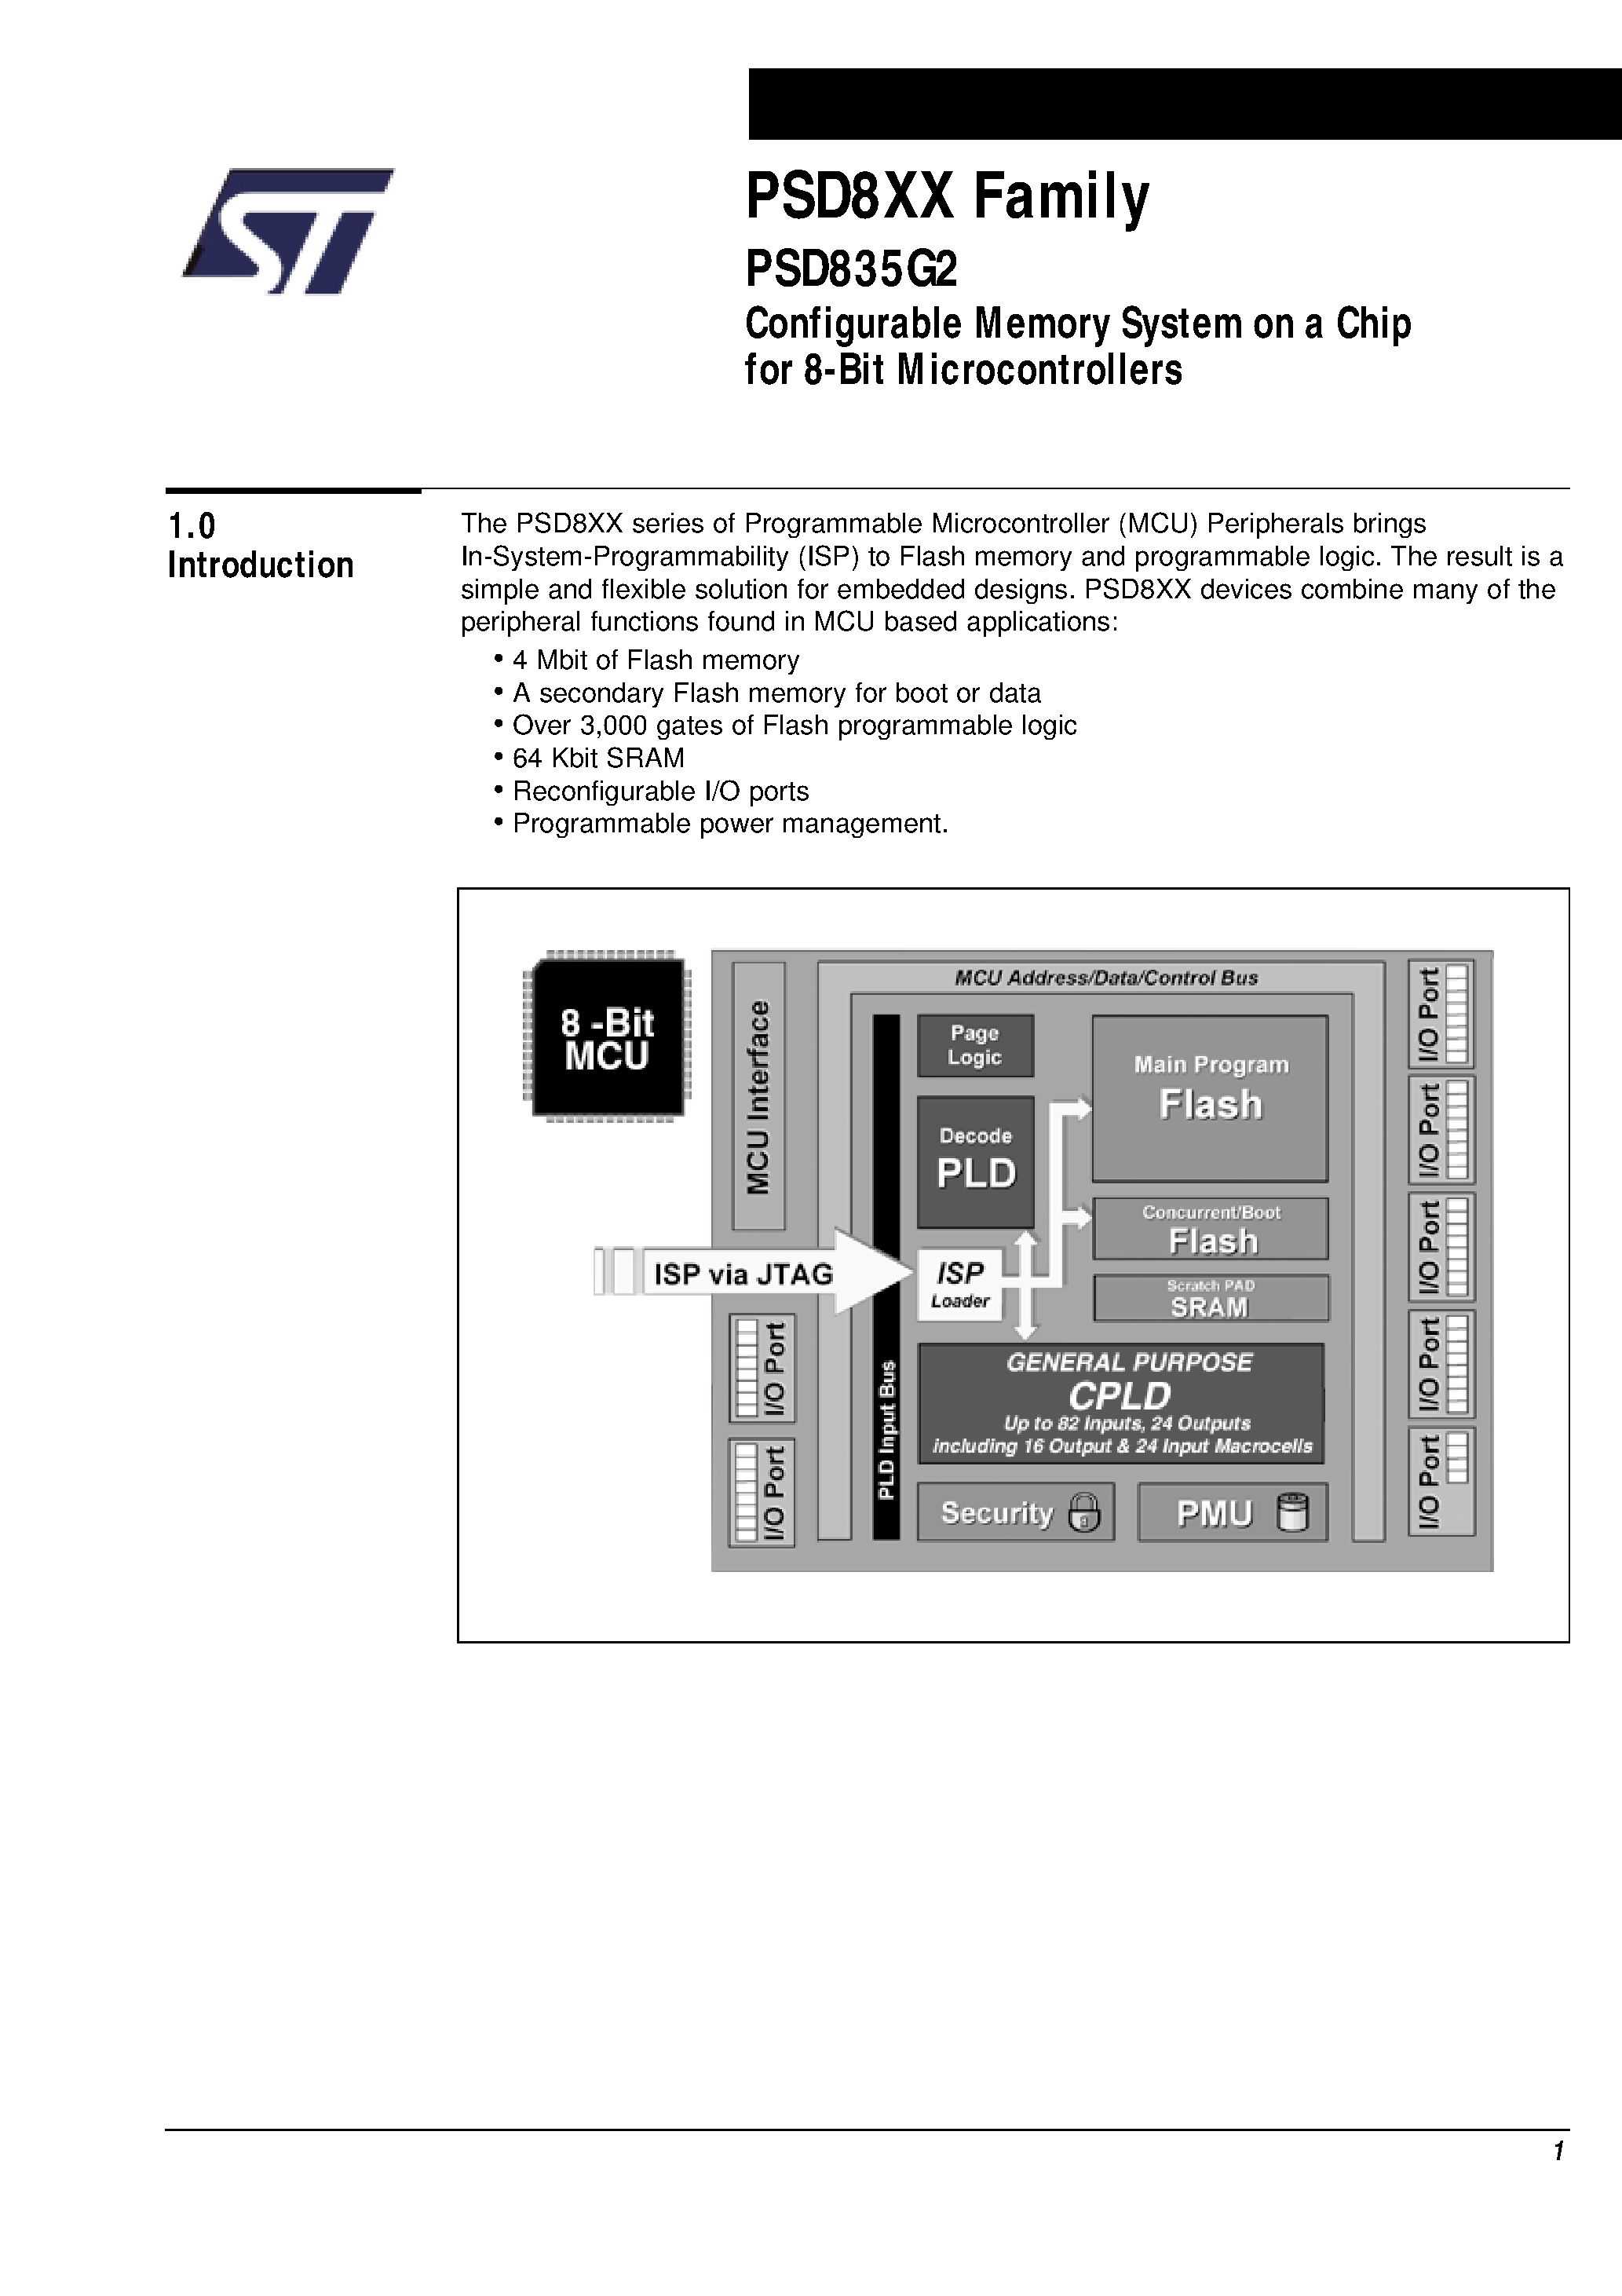 Datasheet PSD835F2V-A-70J - Configurable Memory System on a Chip for 8-Bit Microcontrollers page 2